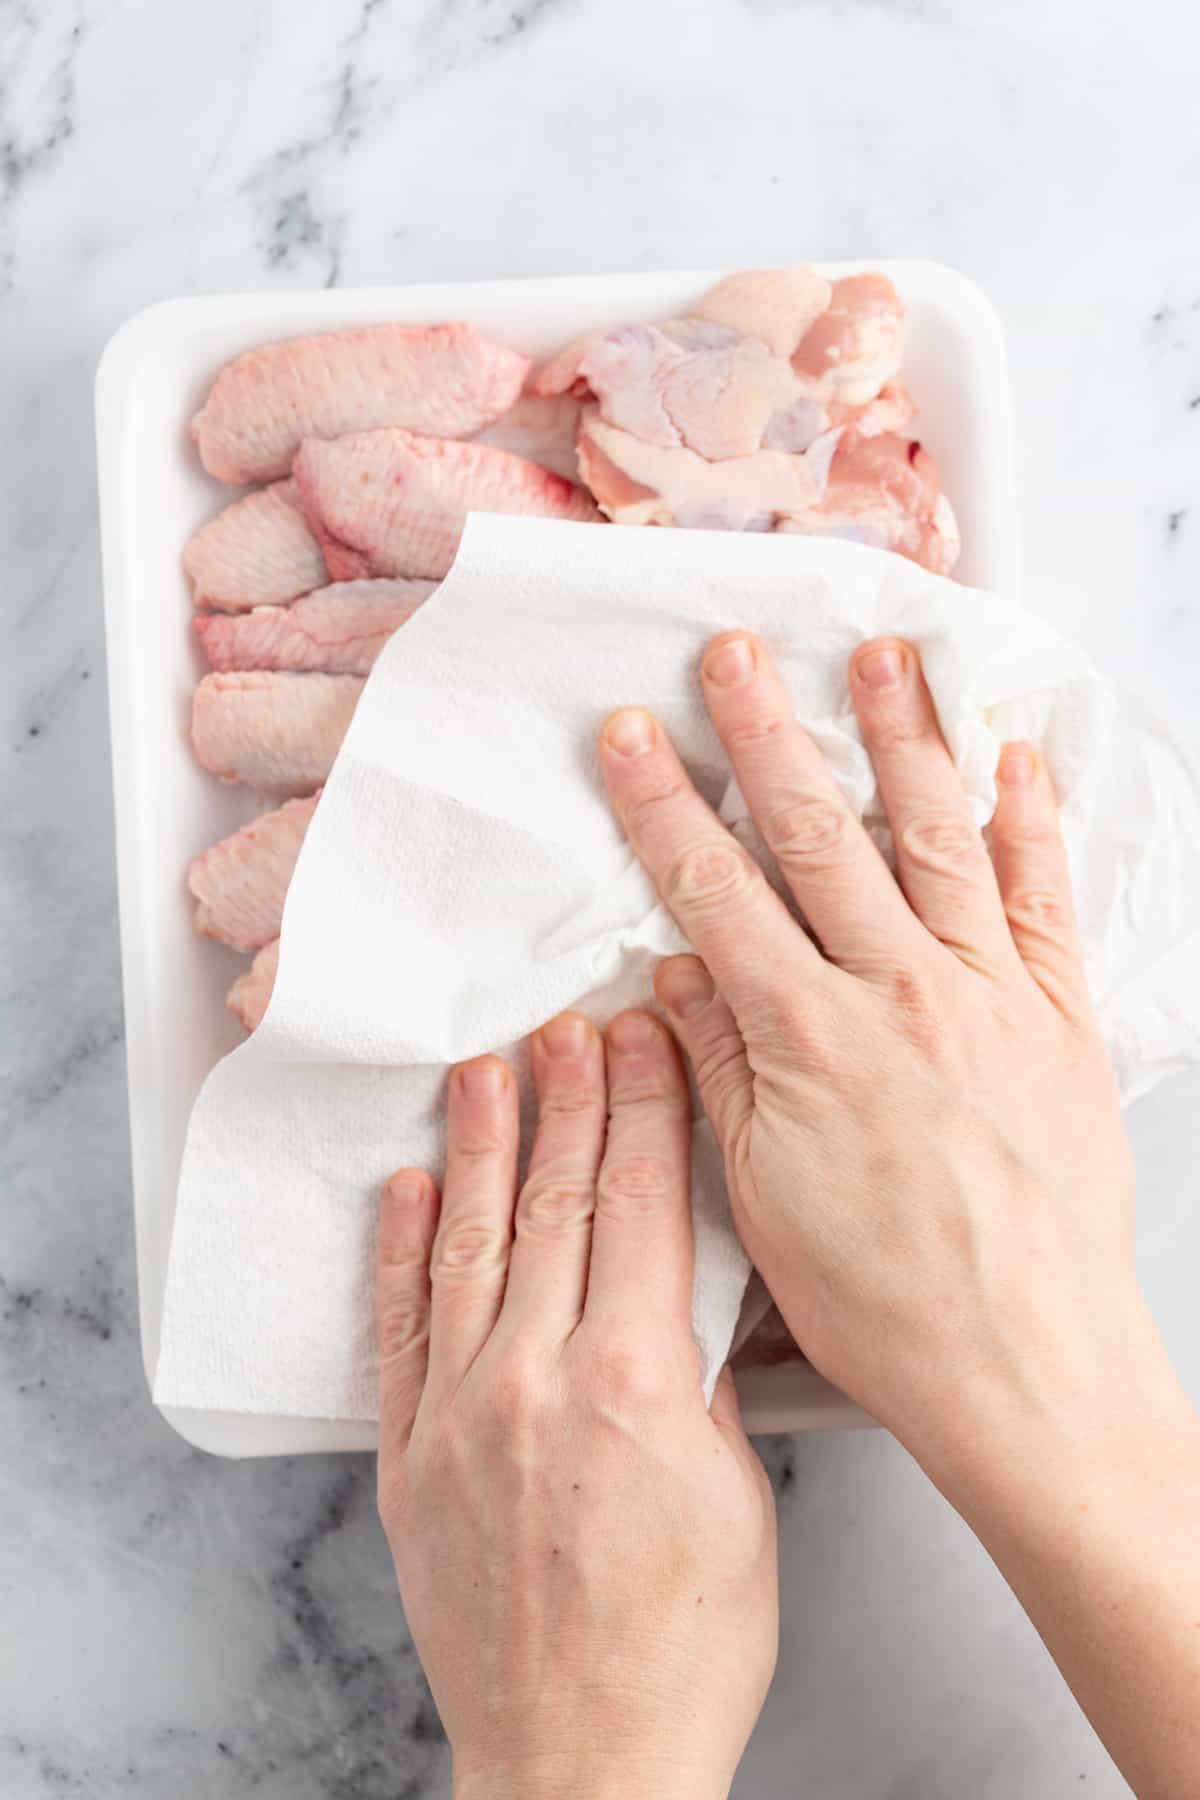 patting chicken wings dry with a paper towel